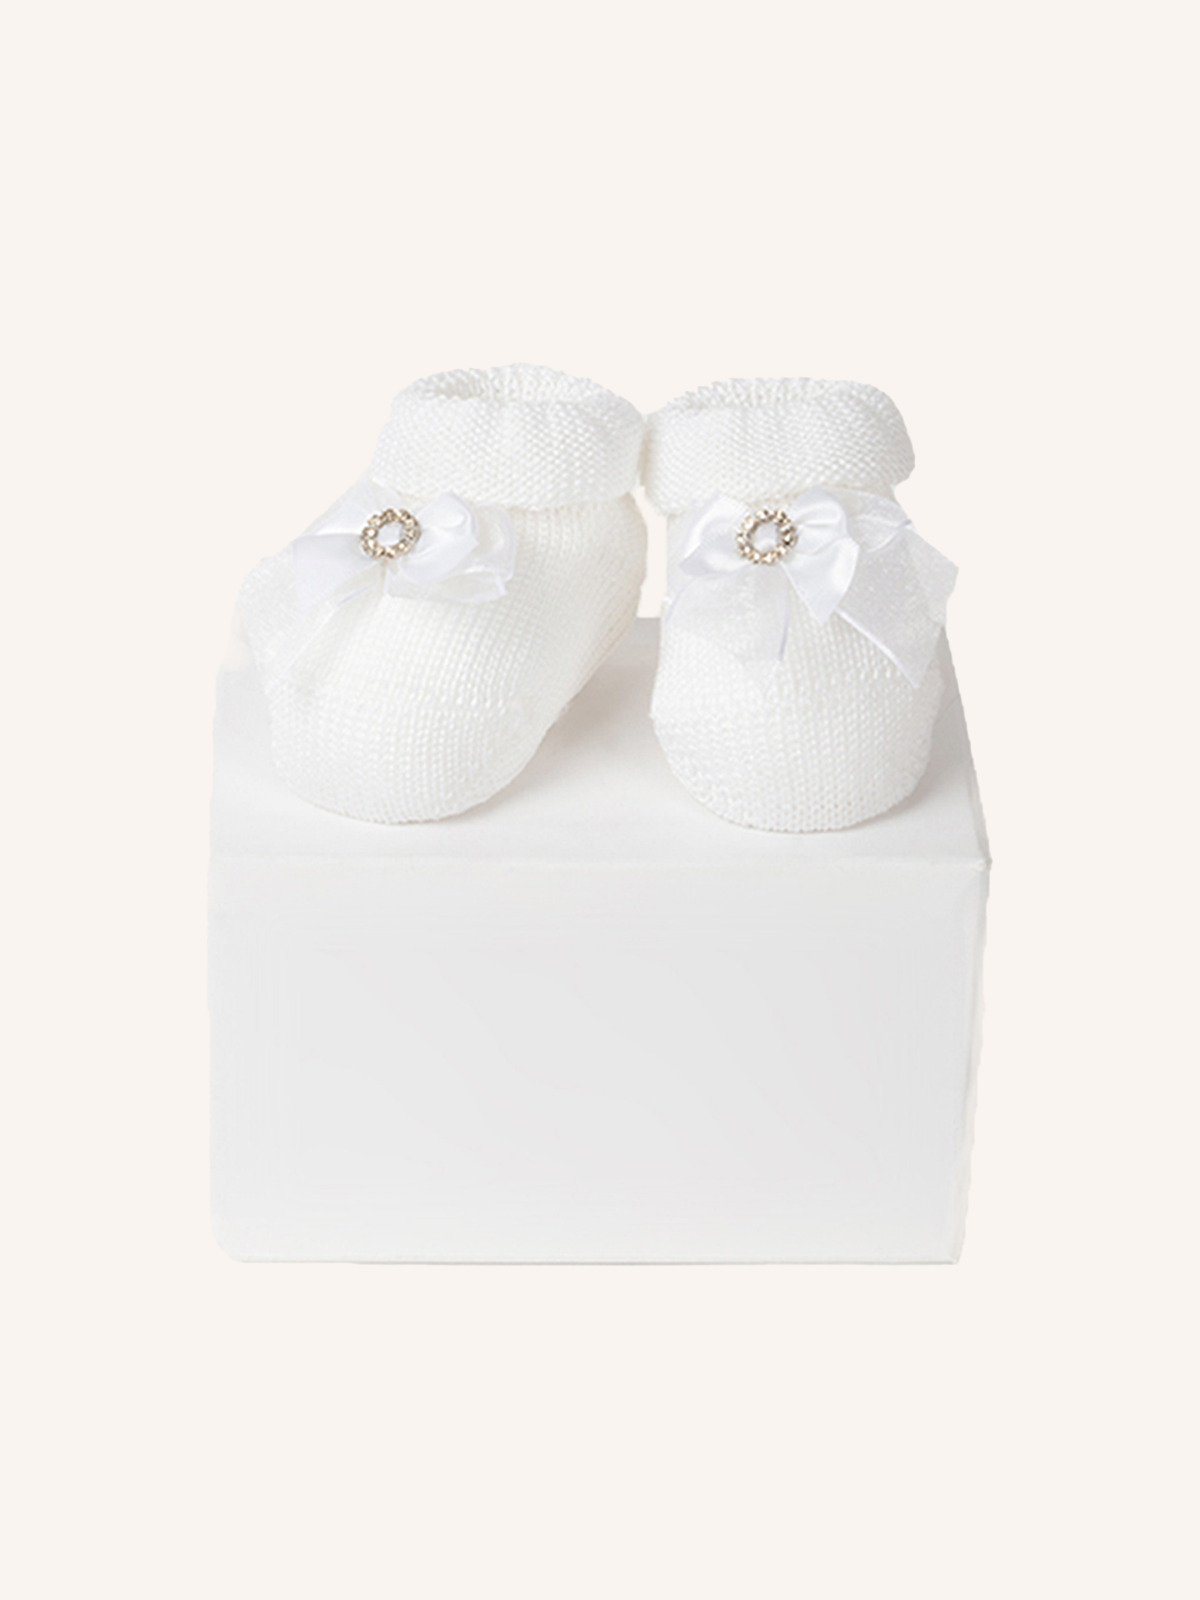 Slipper in Cotton with Satin Bow and Rhinestone Circle for Newborn | Ivory Color | Pack of 1 Pair | 42932